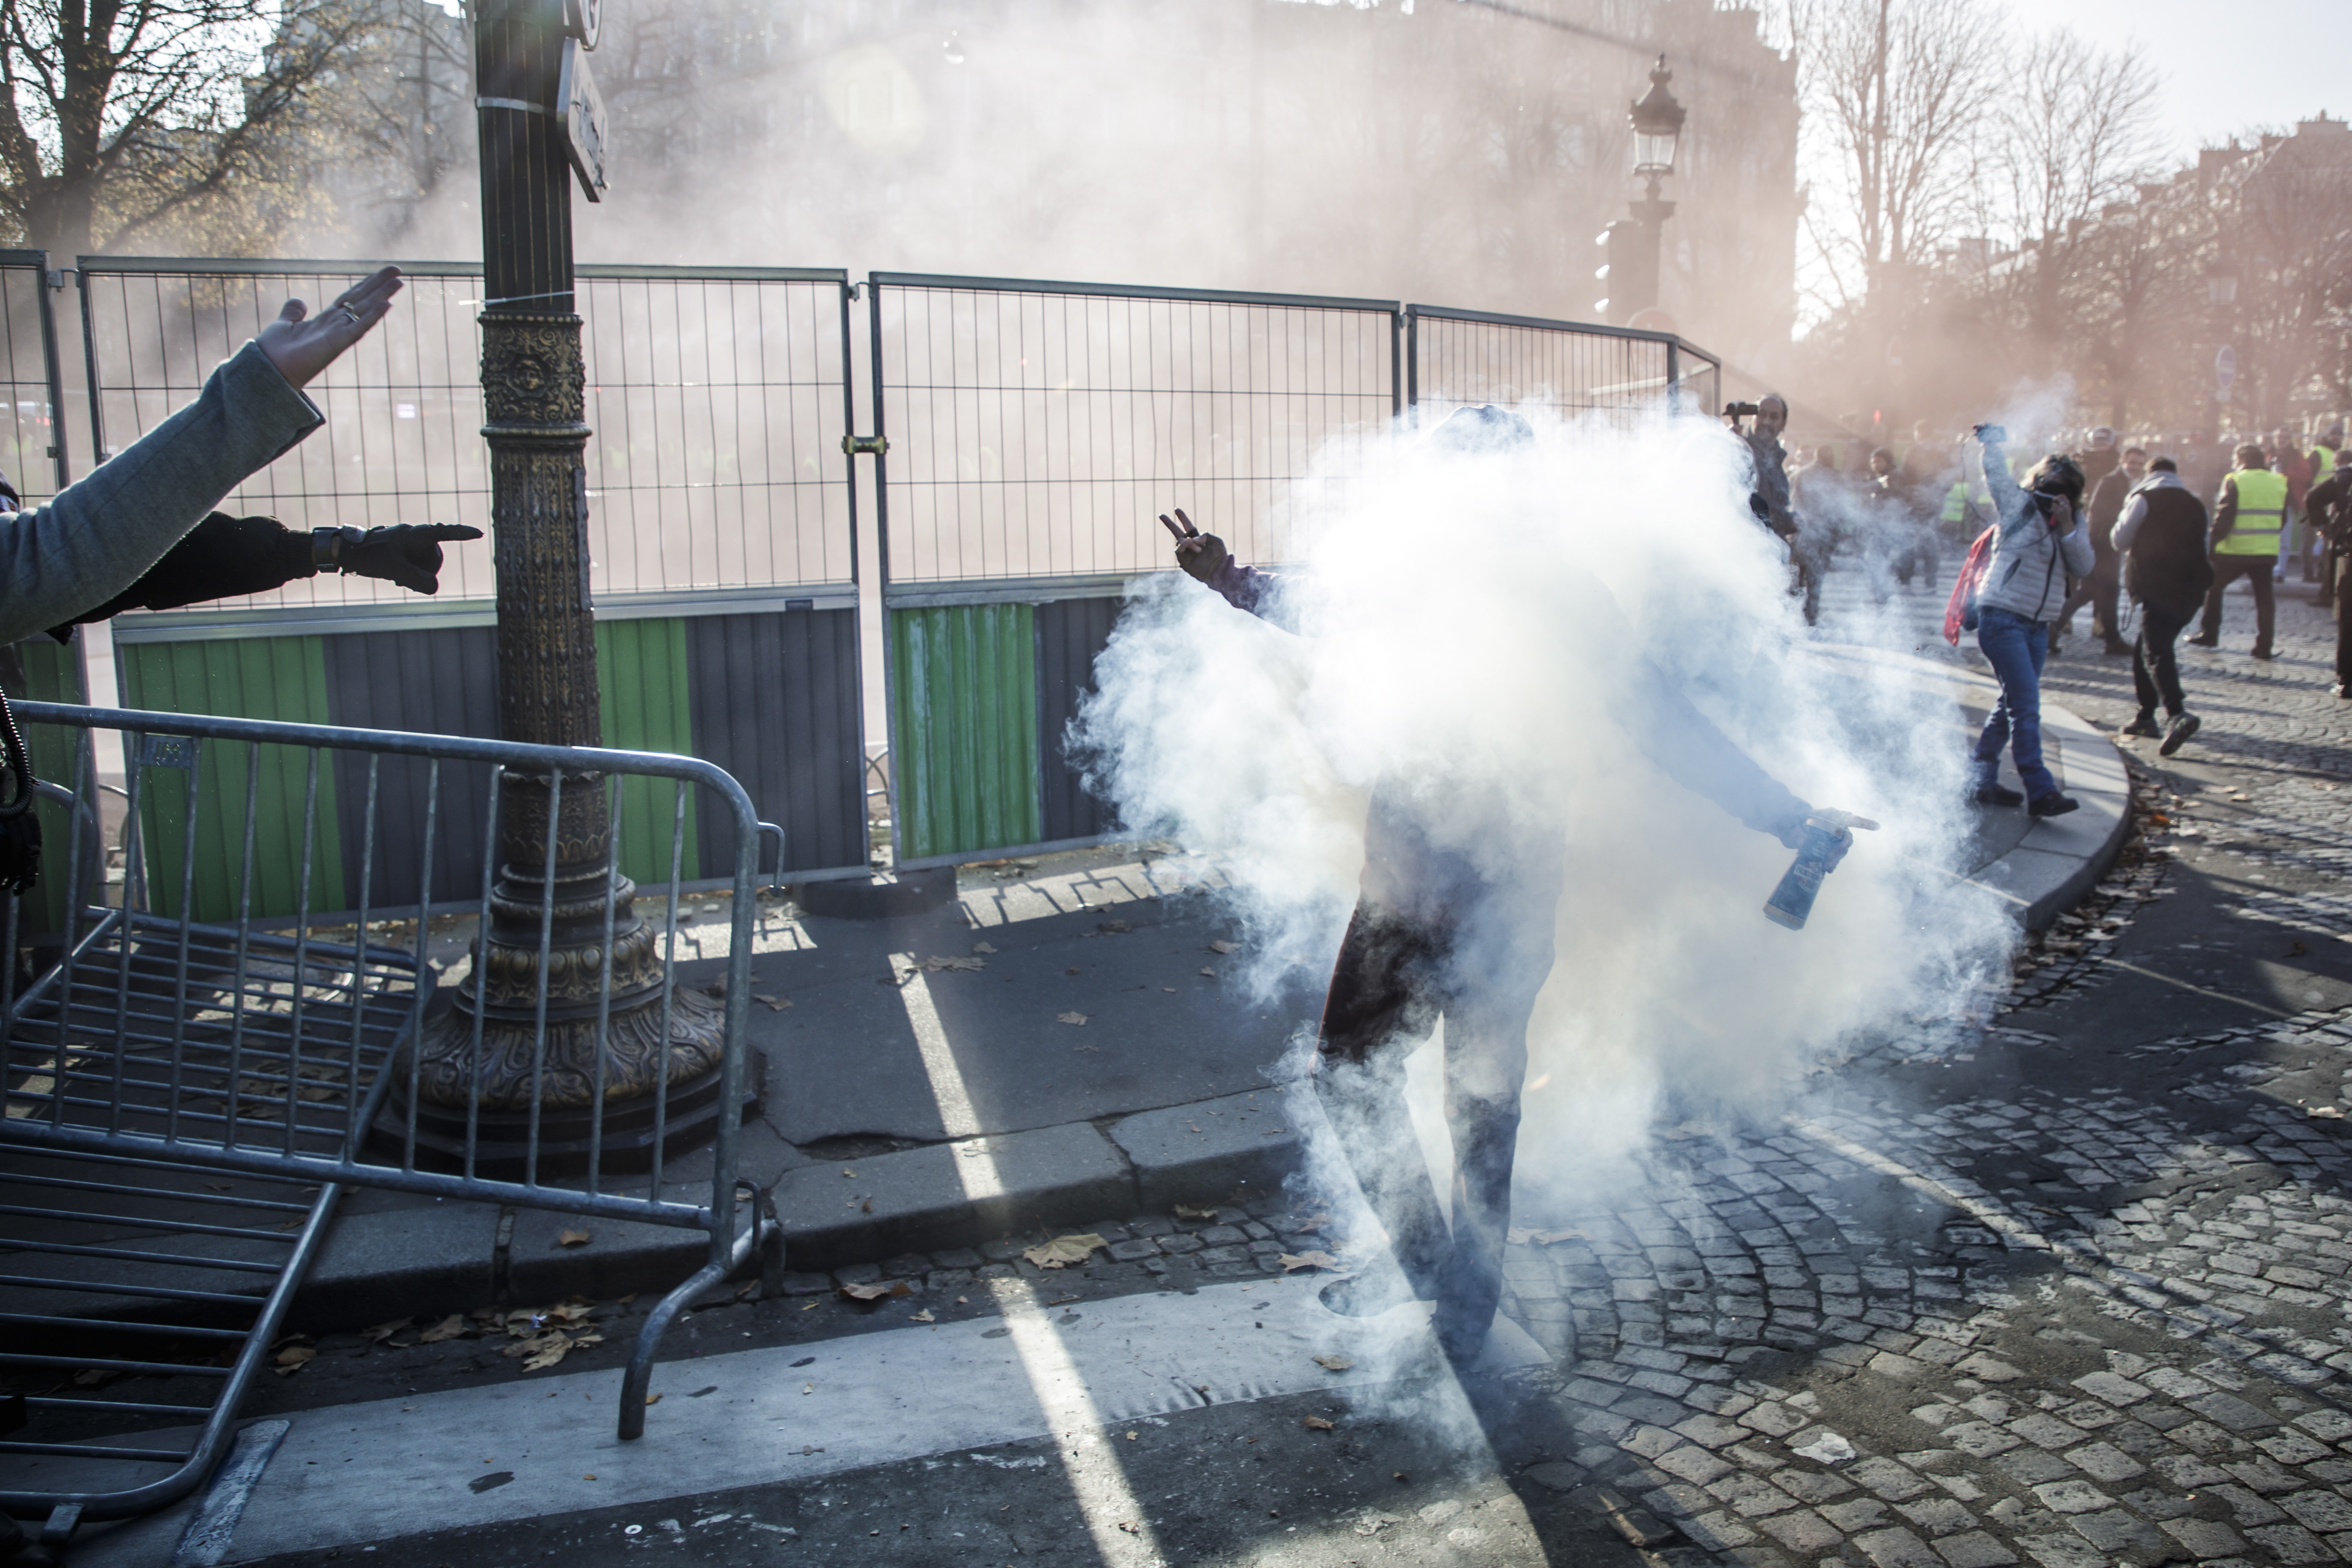 epa07173141 Police forces use tear gas against people wearing  yellow vests, as a symbol of French driver's and citizen's protest against higher fuel prices, during a demonstration on the Champs Elysee as part of a nationwide protest in Paris, France, 17 November 2018. The so-called 'gilets jaunes' (yellow vests) protest movement, which has reportedly no political affiliation, is protesting over fuel prices. According to reports, a female protester died after she was ran over by a vehicle in the south-eastern Savoy region as others were injured elsewhere during nationwide demonstrations.  EPA/CHRISTOPHE PETIT TESSON